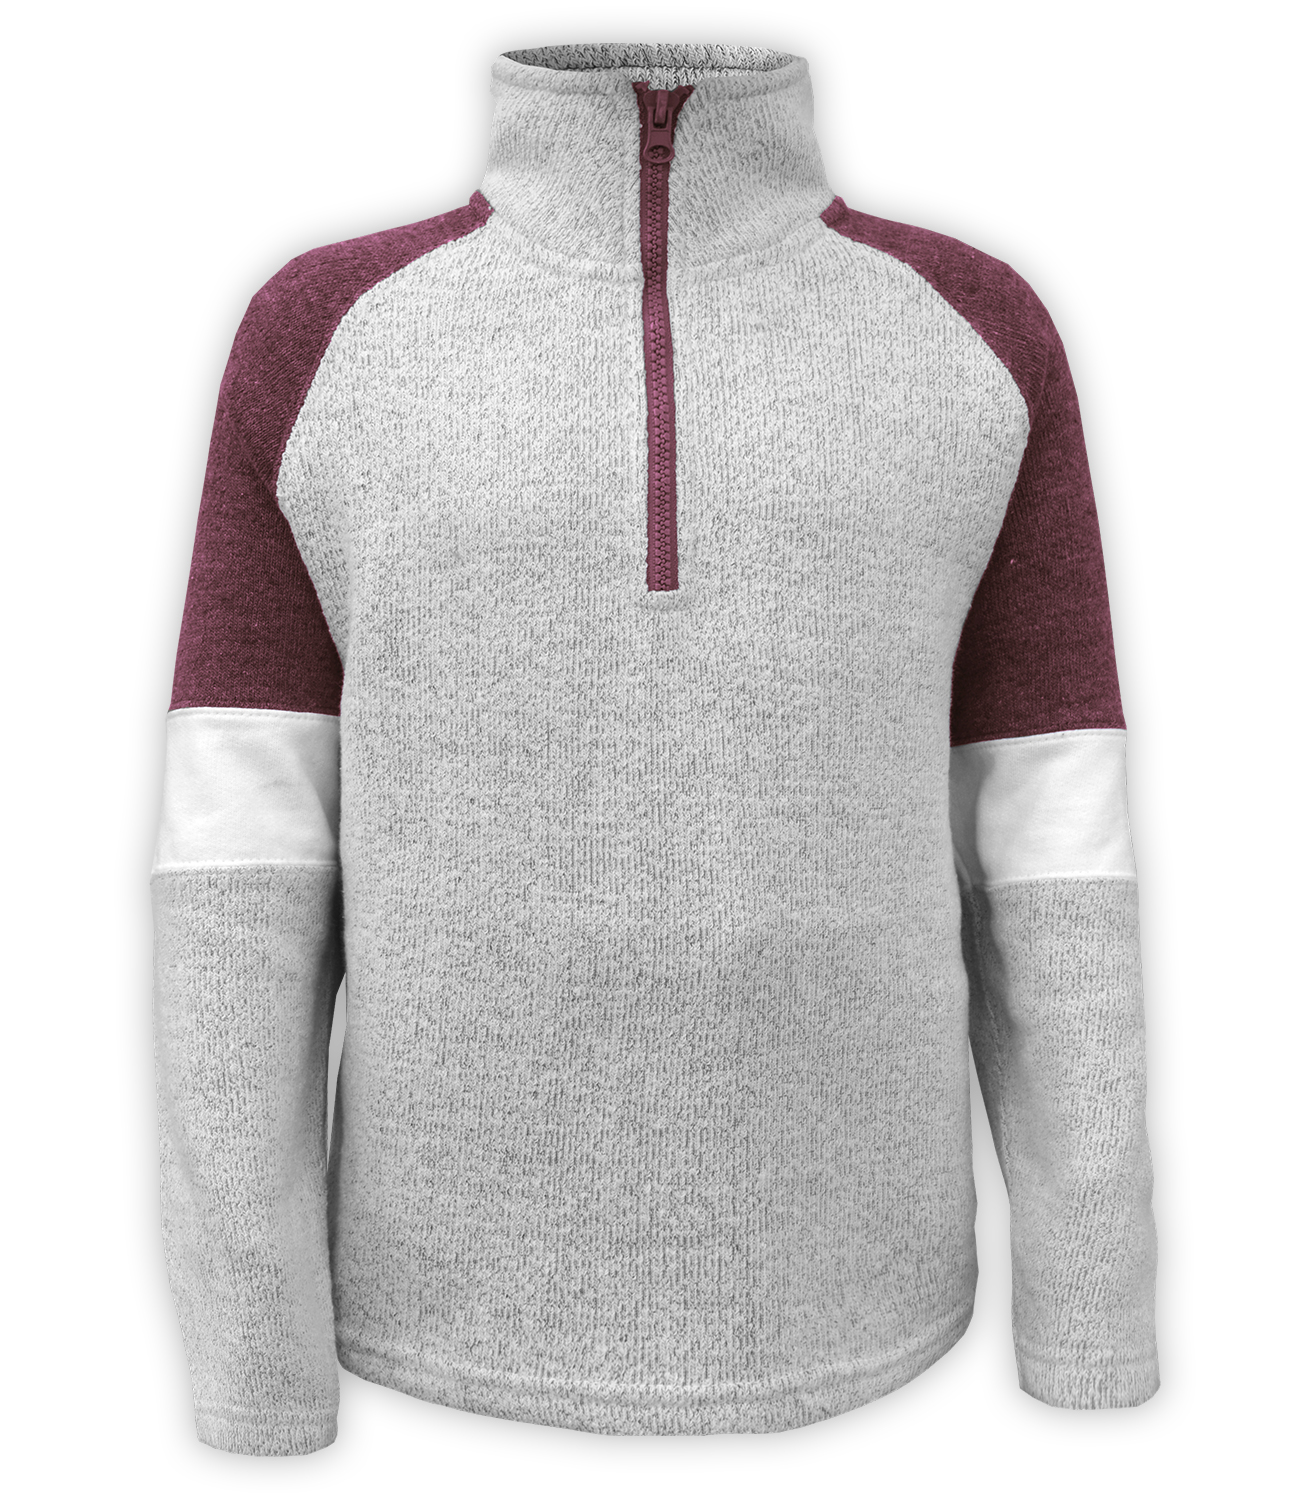 Renegade Club youth pullover, nantucket fleece soft fabric sweater, half zip, maroon, red, brown, gray, white arm bands stand up collar, wholesale pullover kids